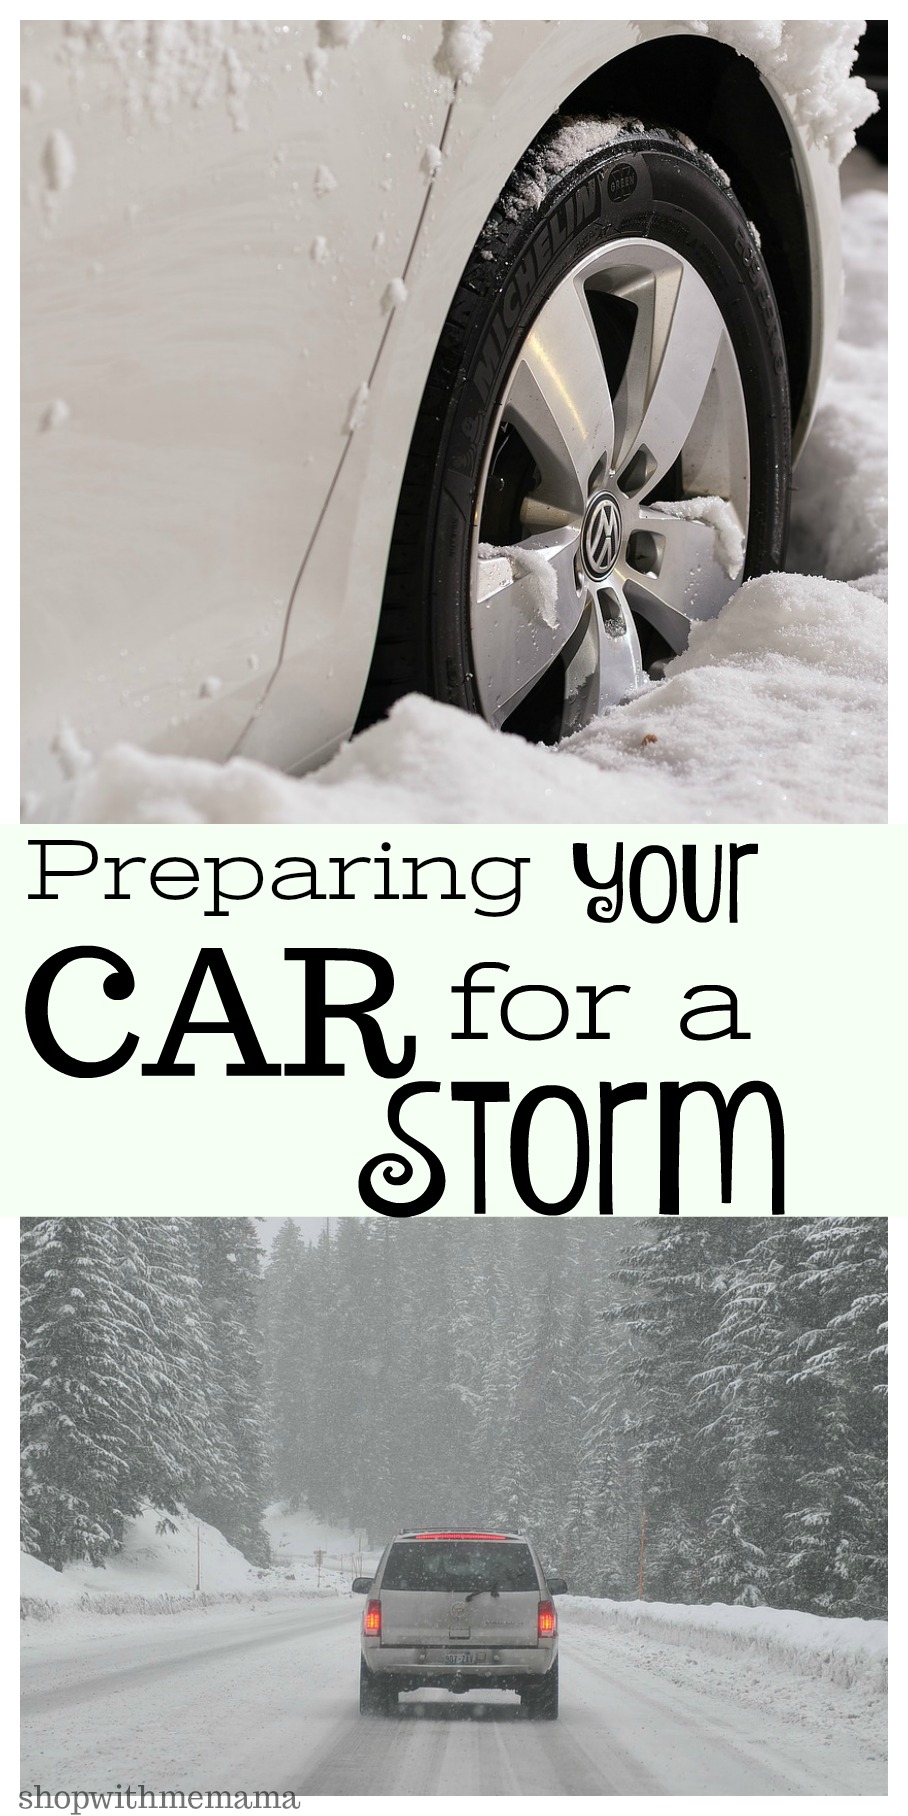 Preparing Your Car for a Storm